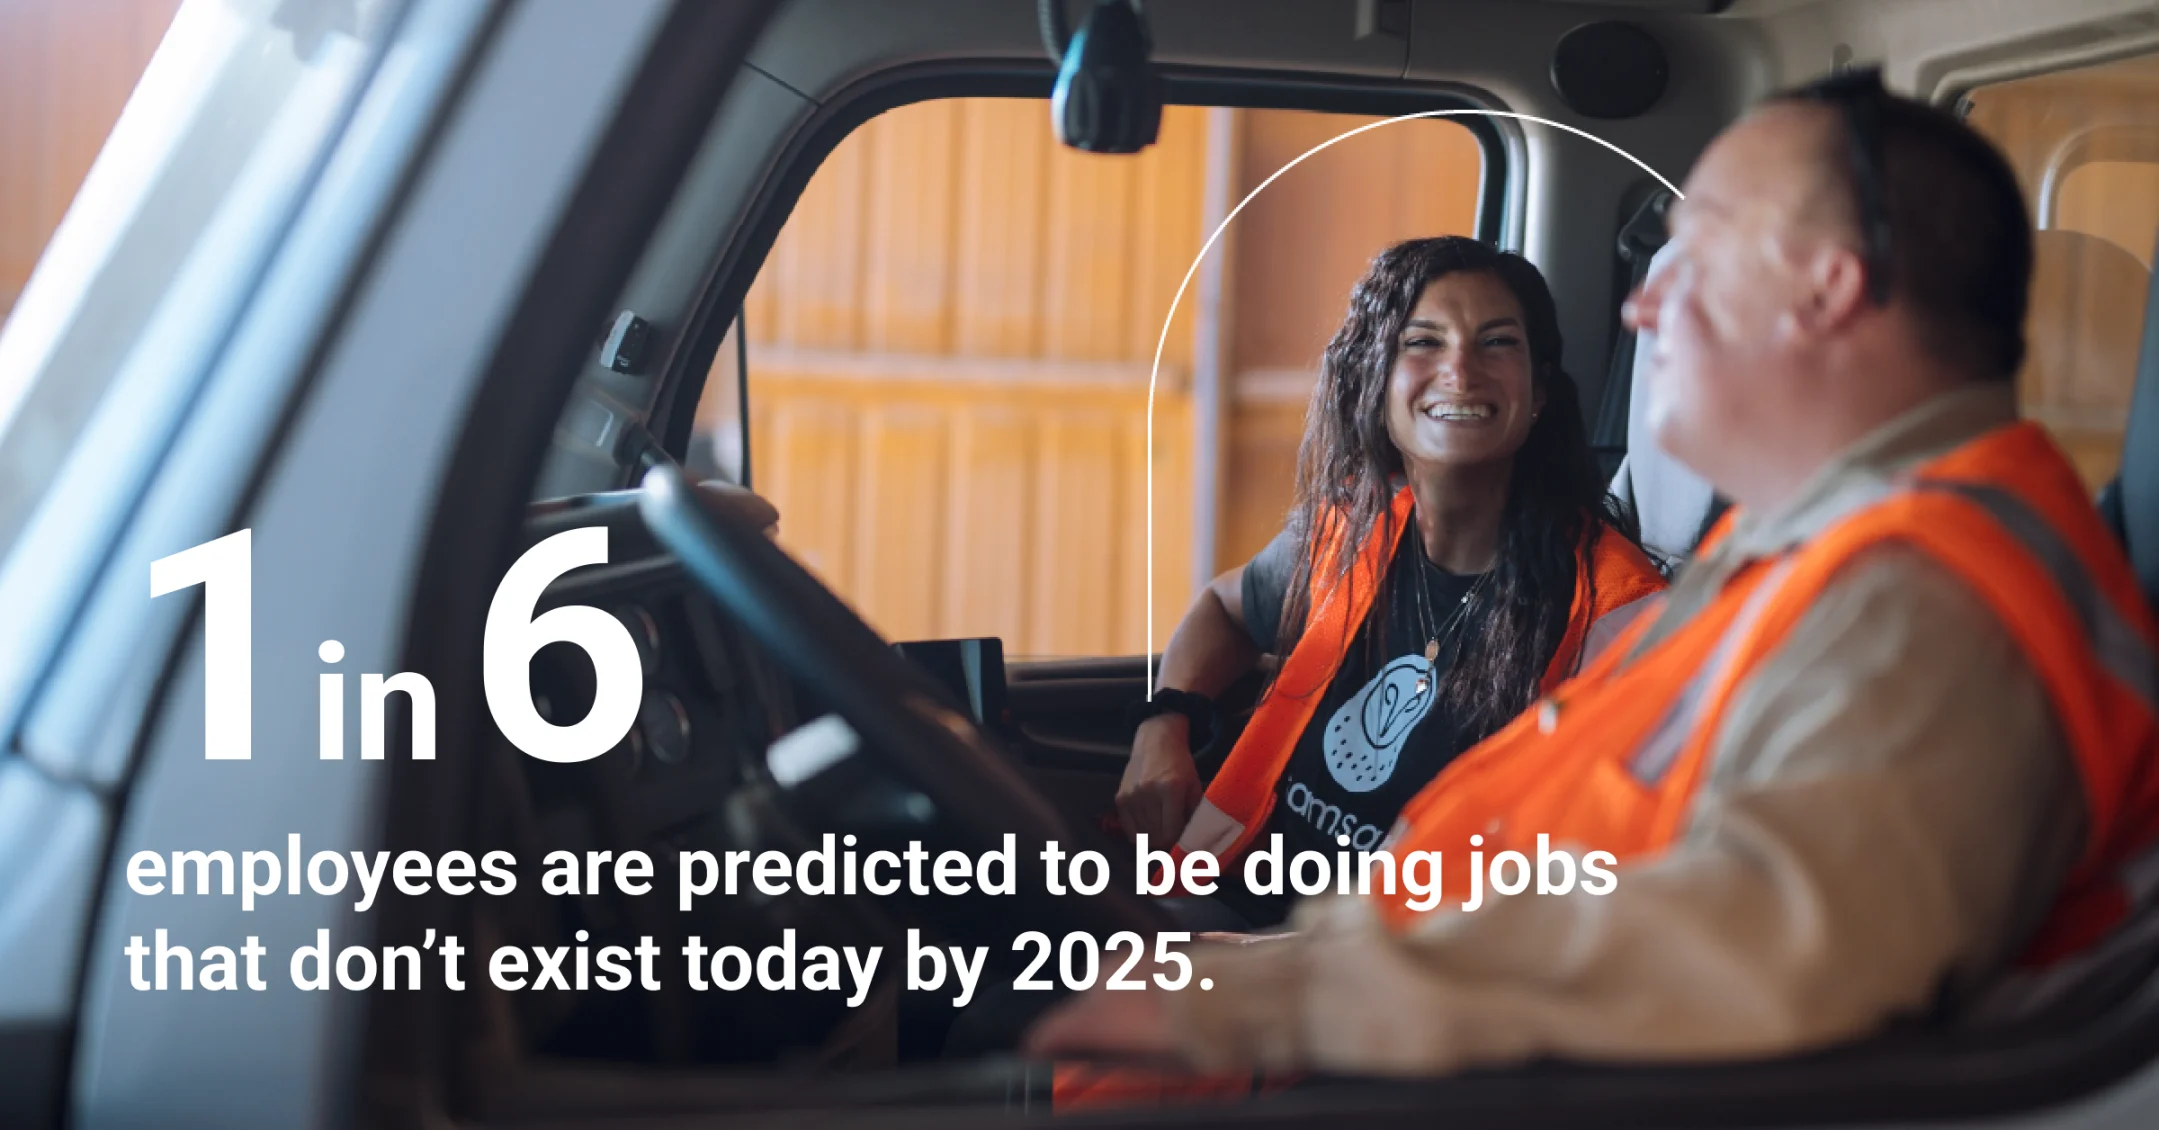 1 in 6 employees are predicted to be doing jobs that don't exist today by 2025